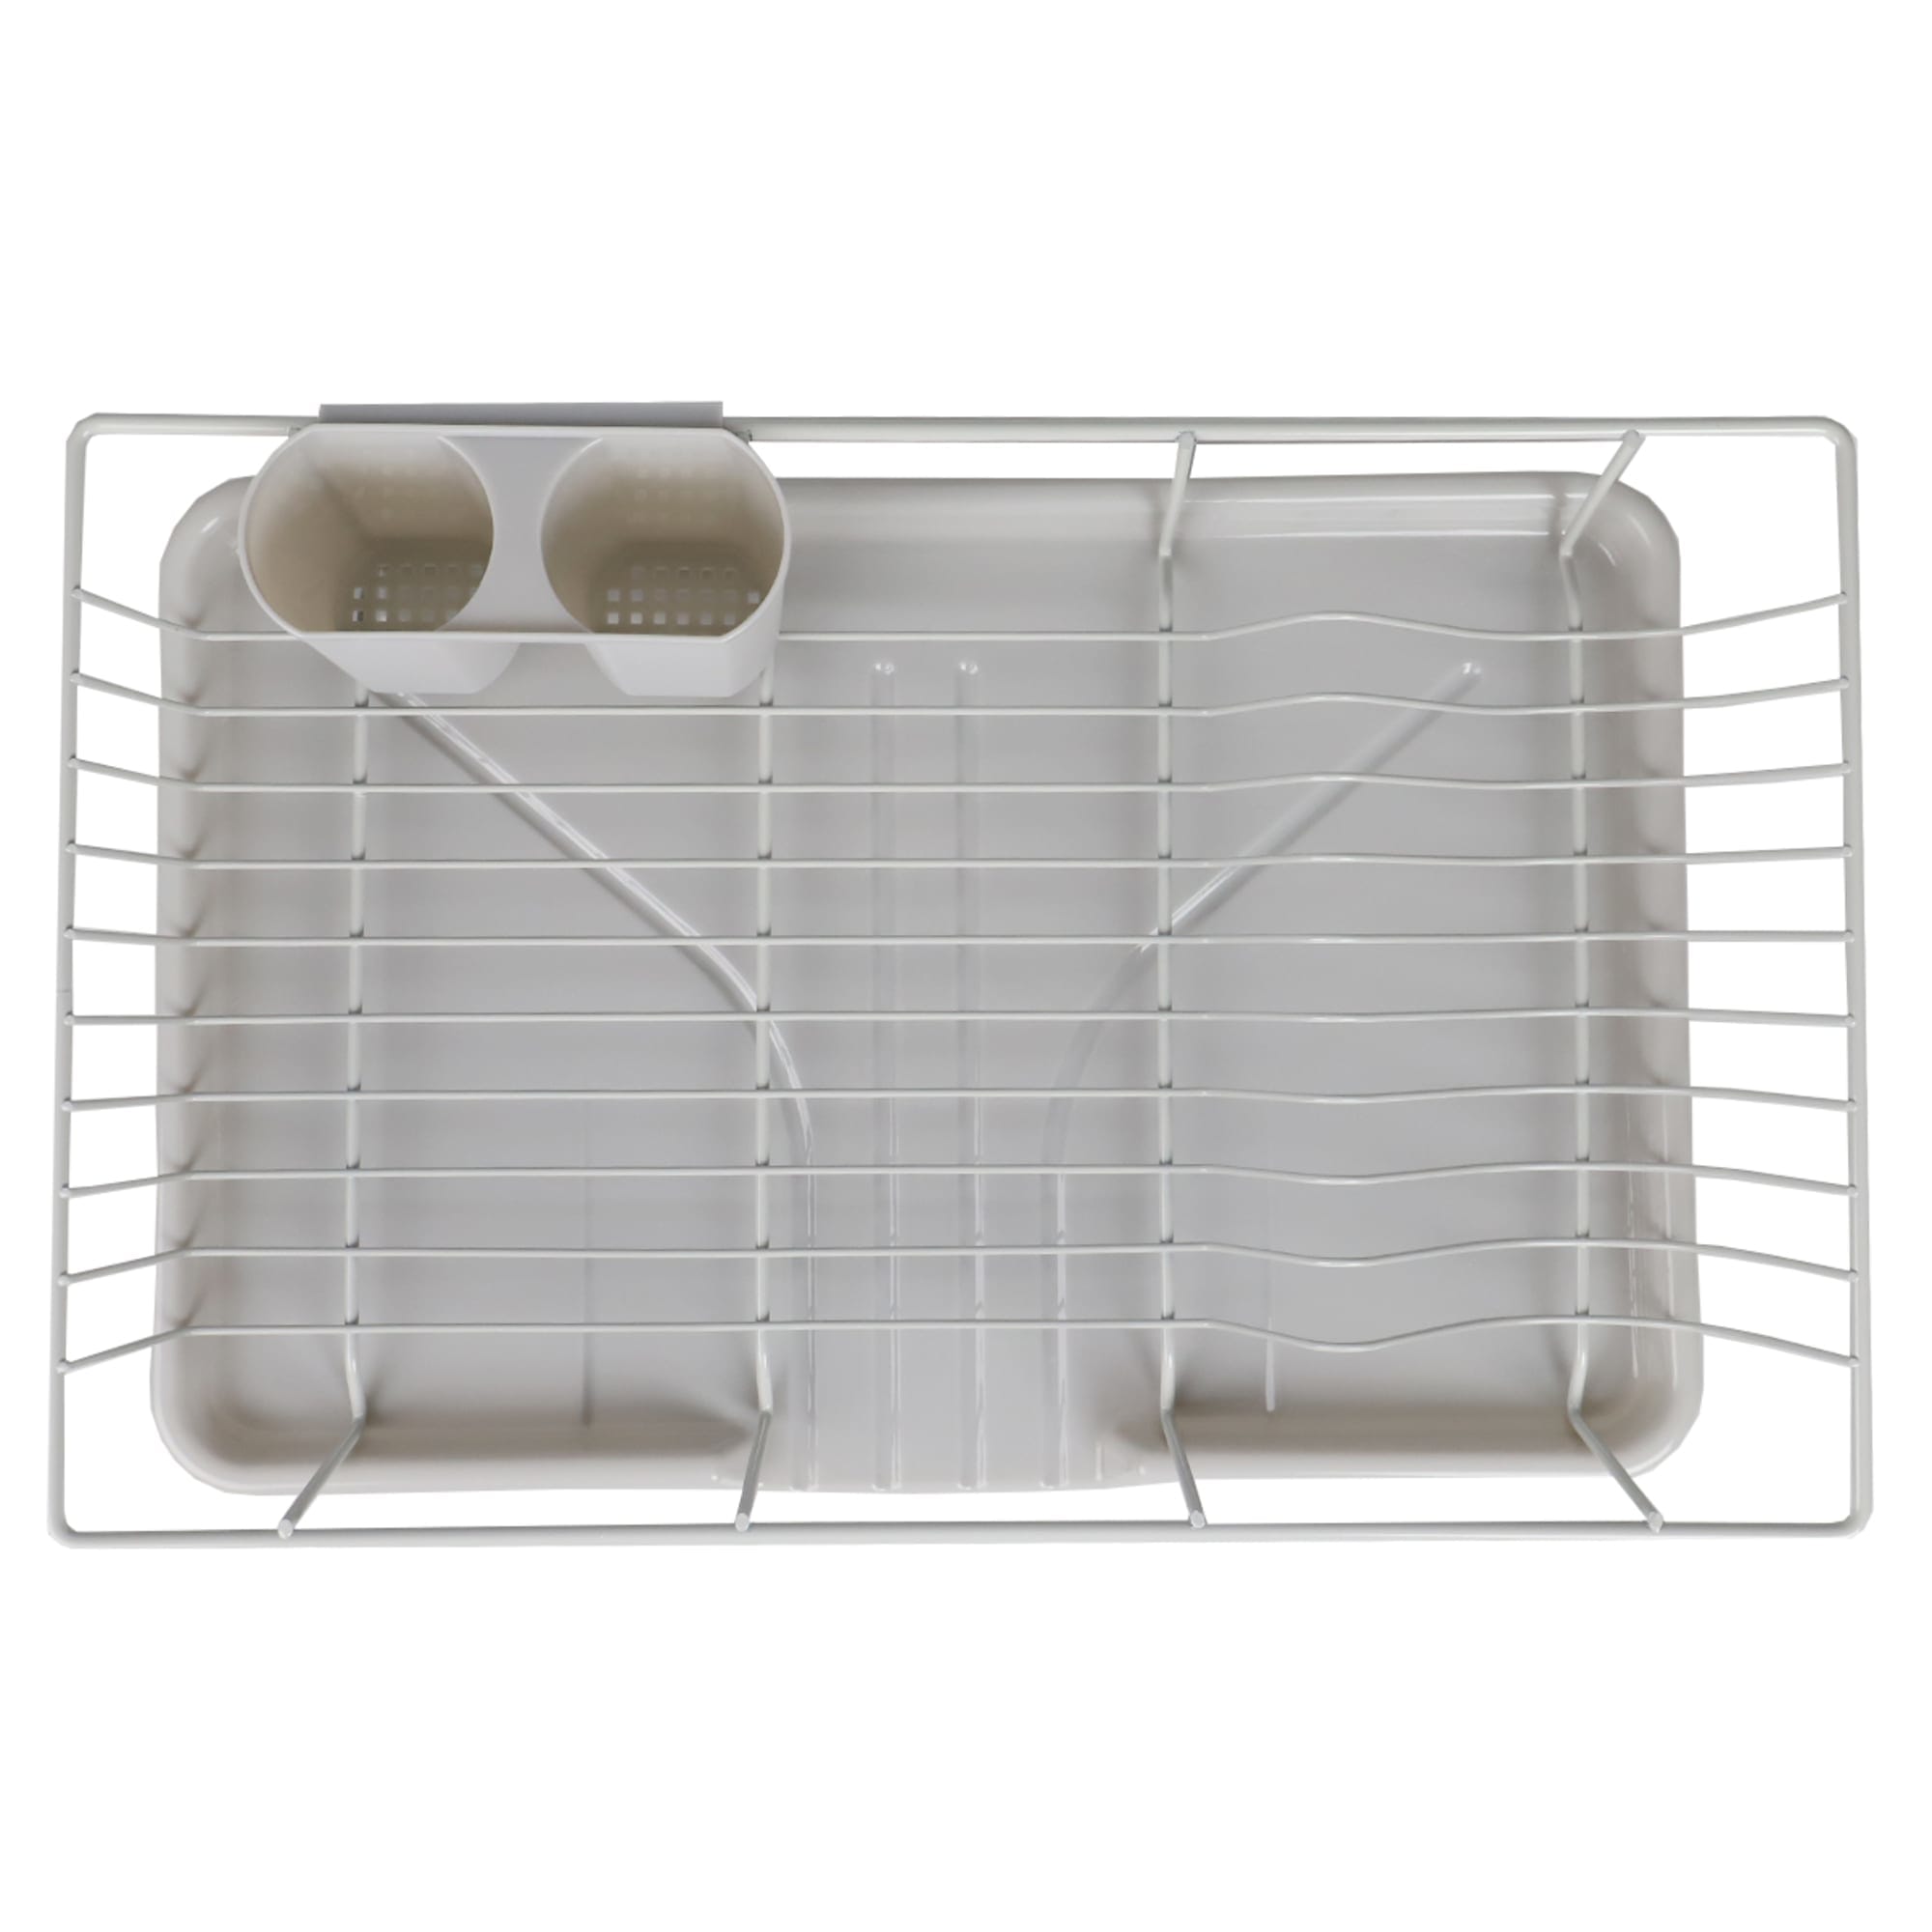 Home Basics 3 Piece Dish Drainer, Silver $10.00 EACH, CASE PACK OF 6